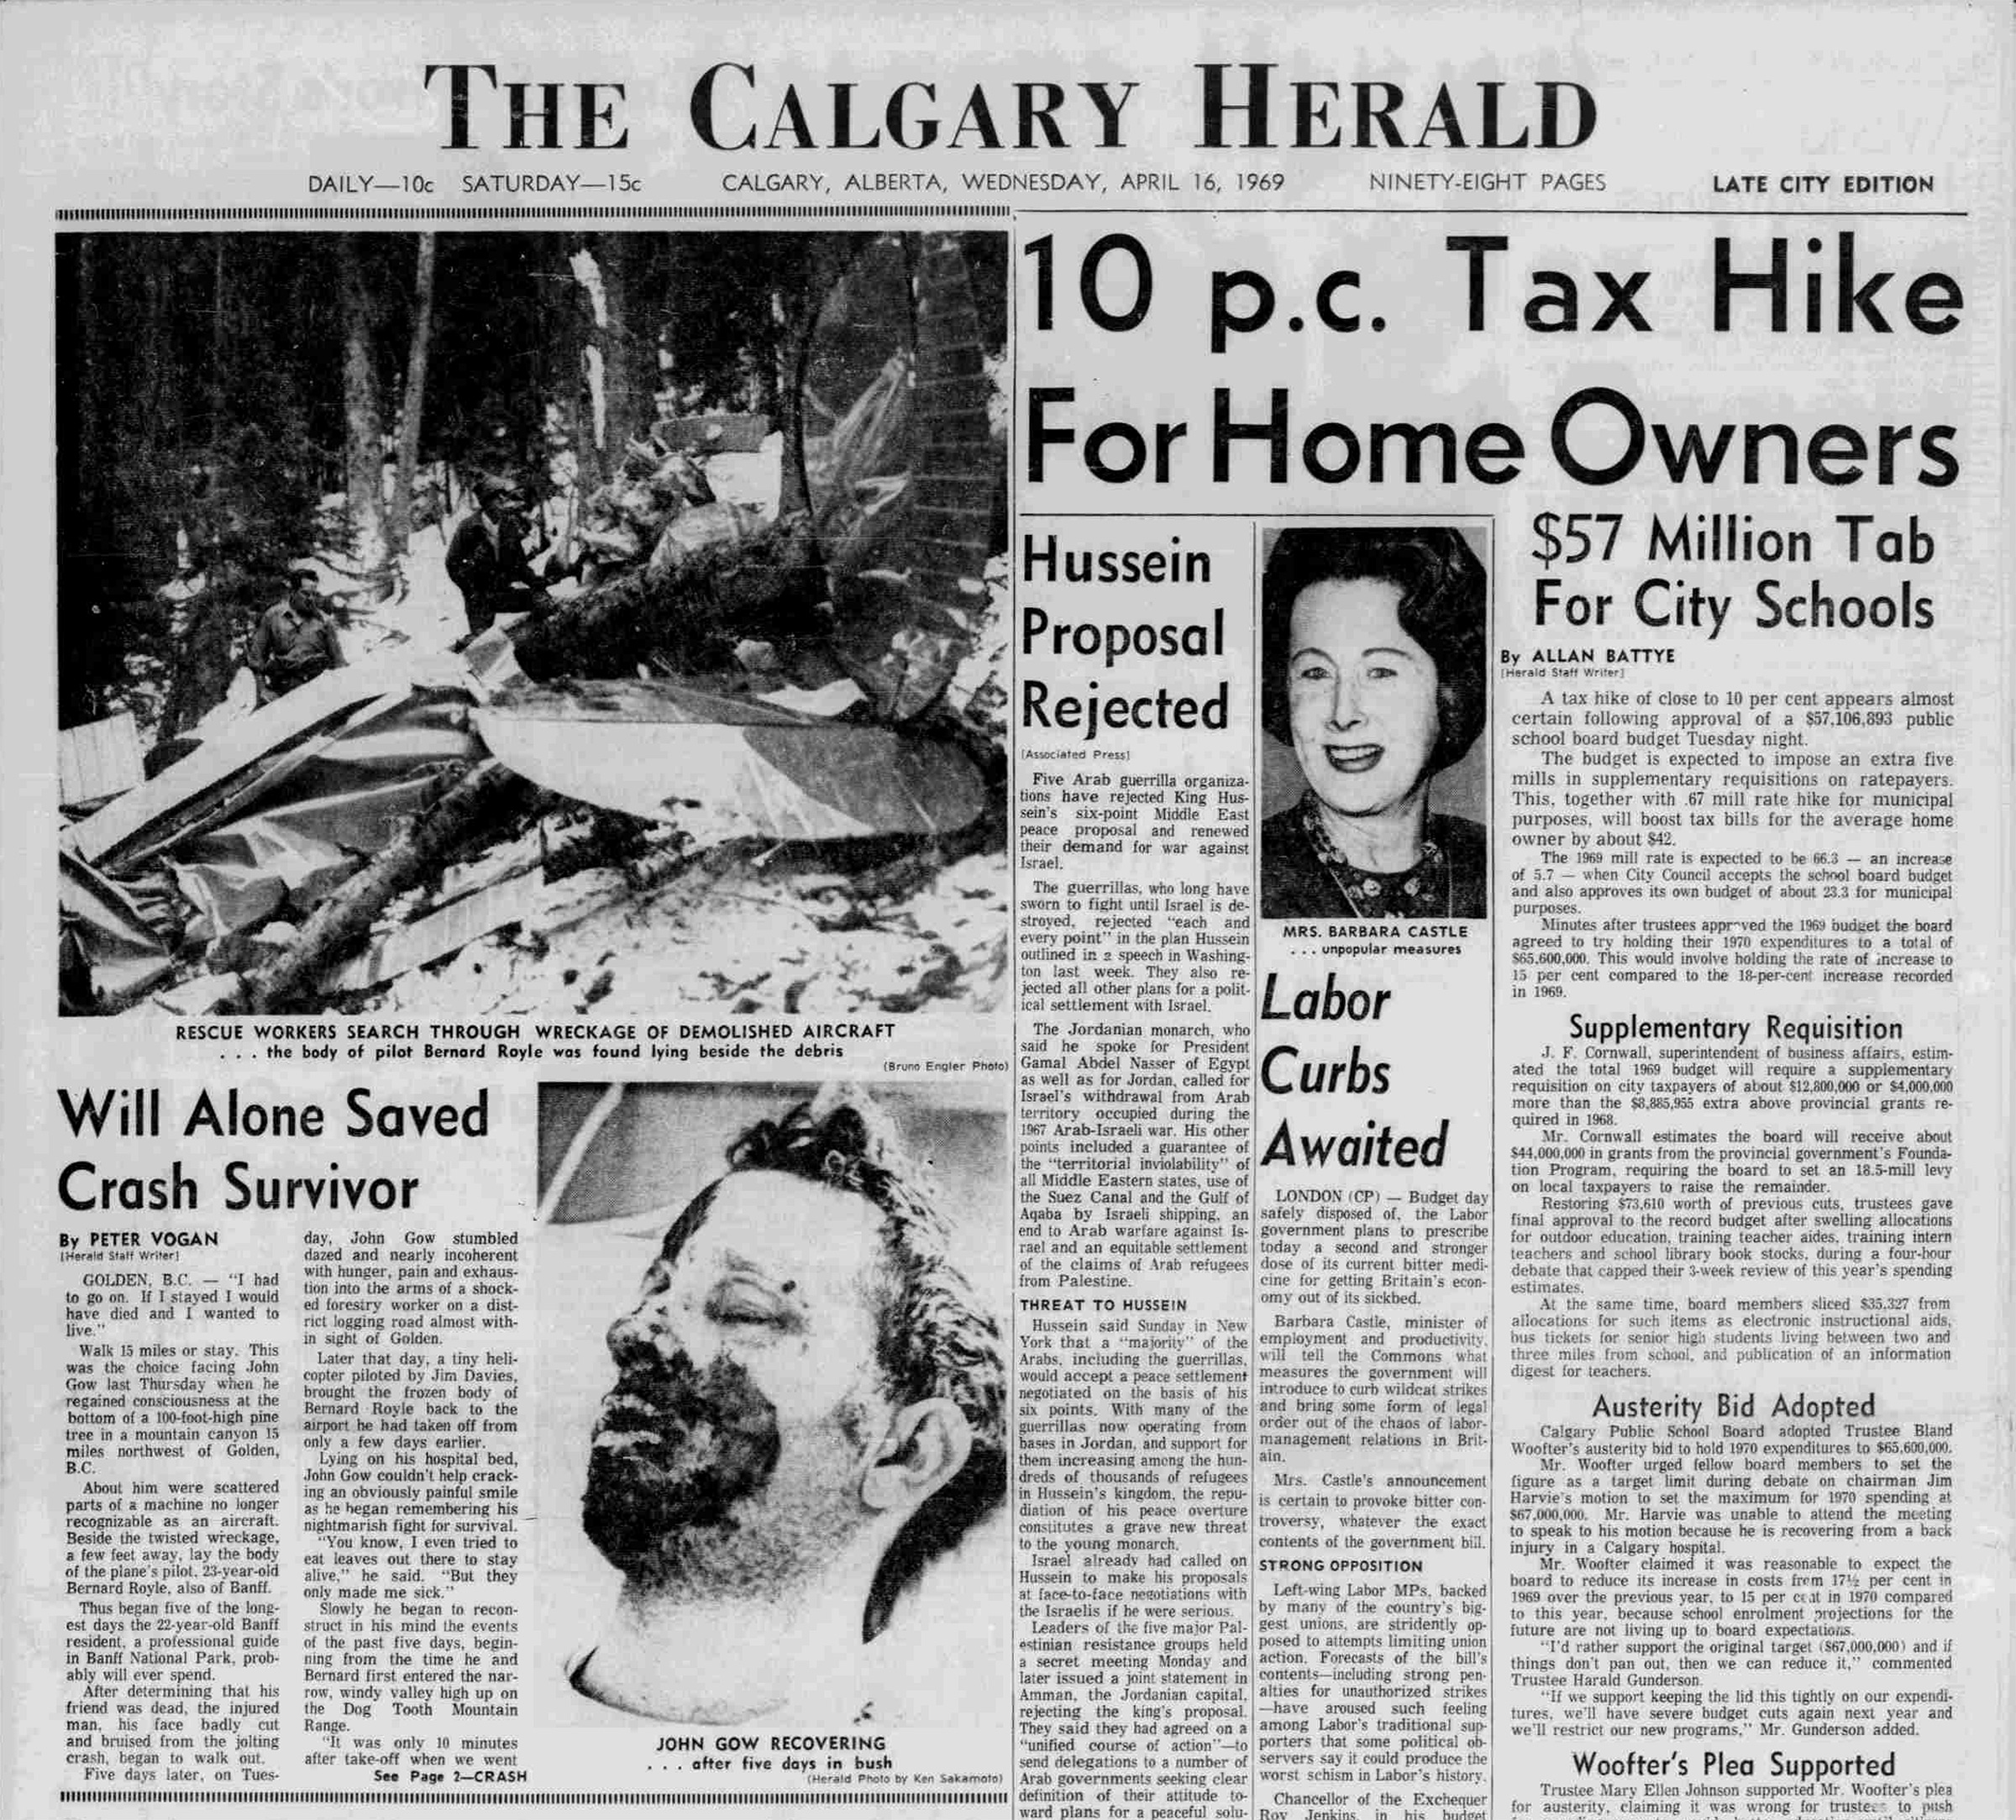 The front page of The Calgary Herald (cropped), April 16, 1969 (Courtesy Glenbow Western Research Centre)